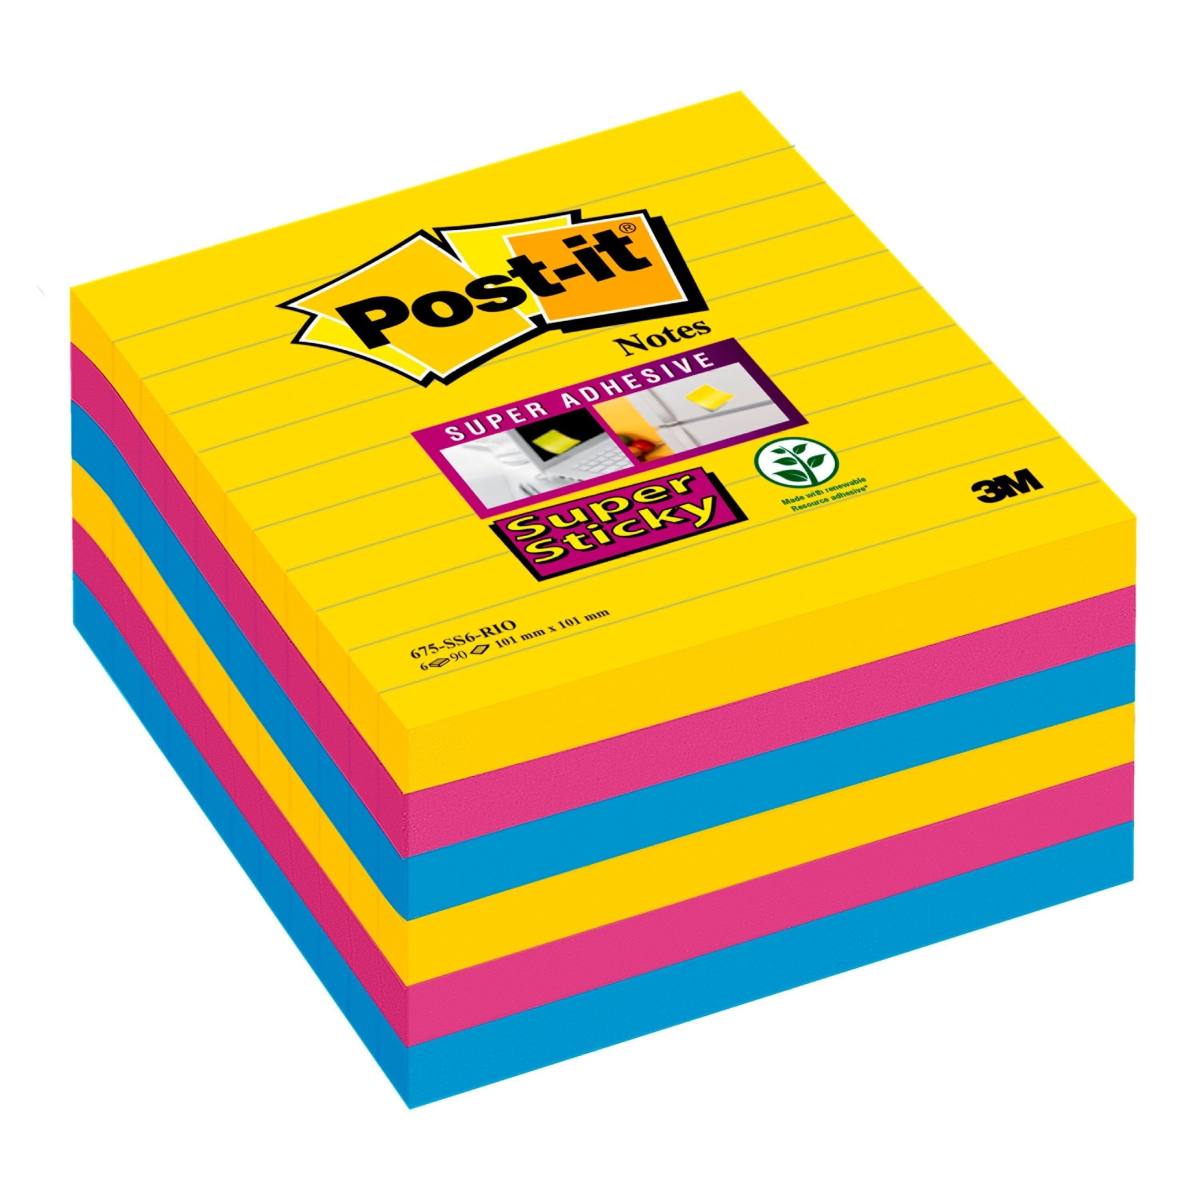 3M Post-it Super Sticky Notes 675-S6R, 6 pads of 90 sheets, Rio de Janeiro Collection: ultra-yellow, -blue, -pink, 101 mm x 101 mm, lined, PEFC certified